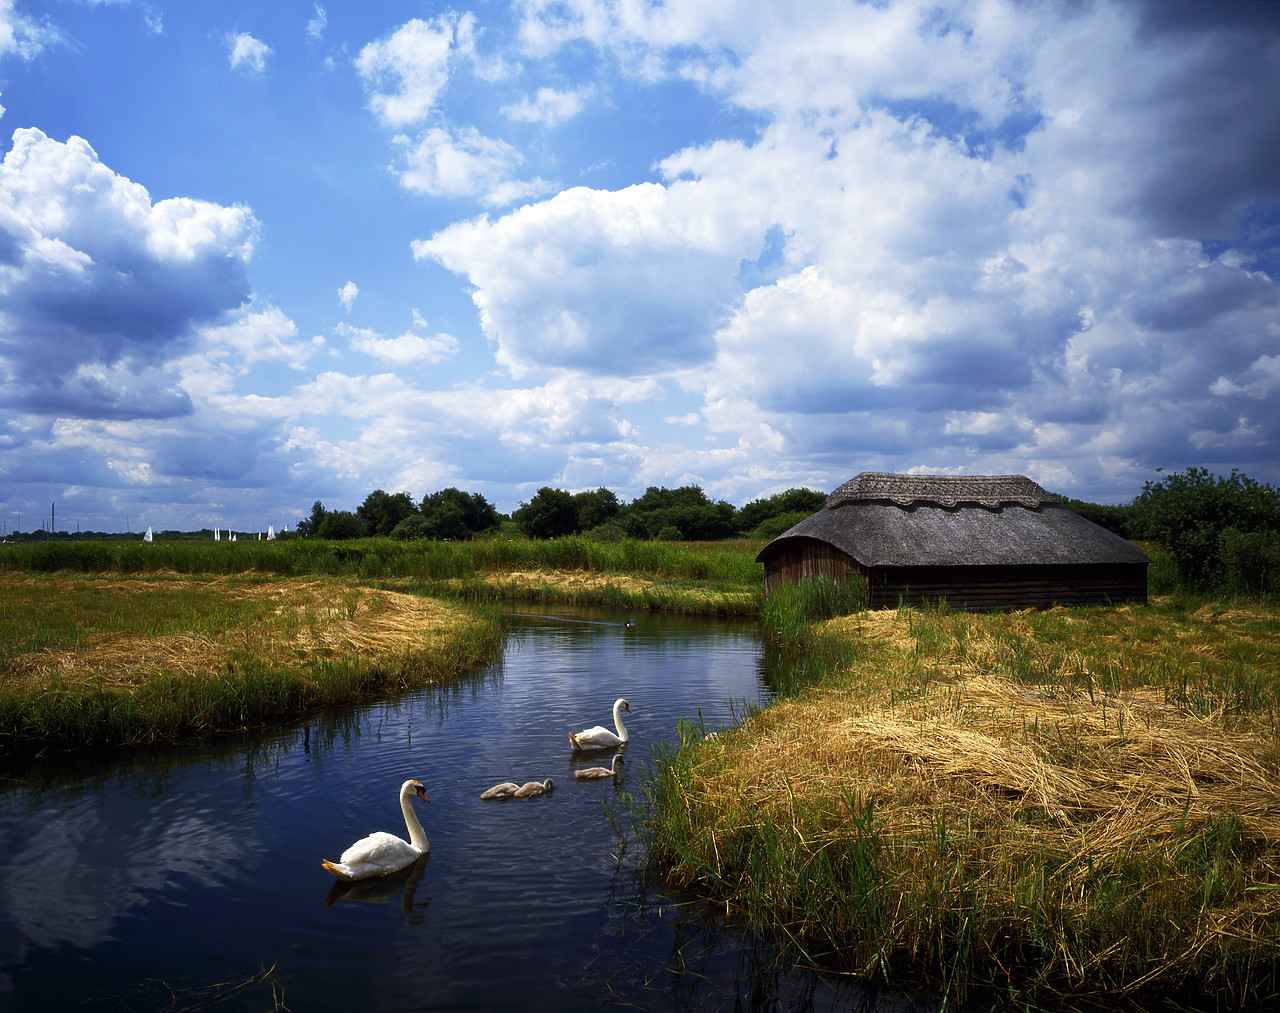 #934341-3 - Thatched Boathouse & Swans, Hickling Broad, Norfolk, England